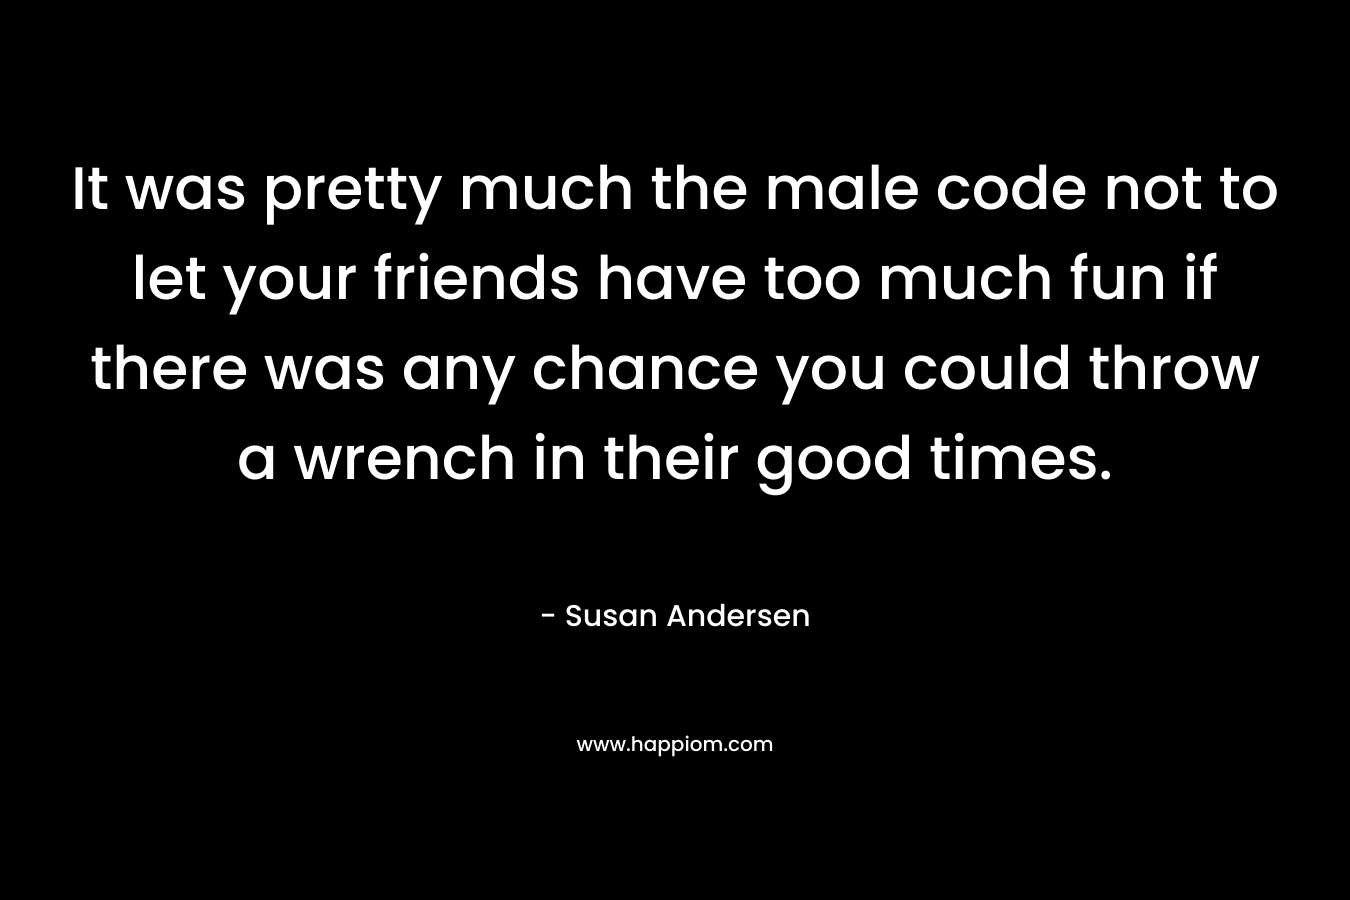 It was pretty much the male code not to let your friends have too much fun if there was any chance you could throw a wrench in their good times. – Susan Andersen